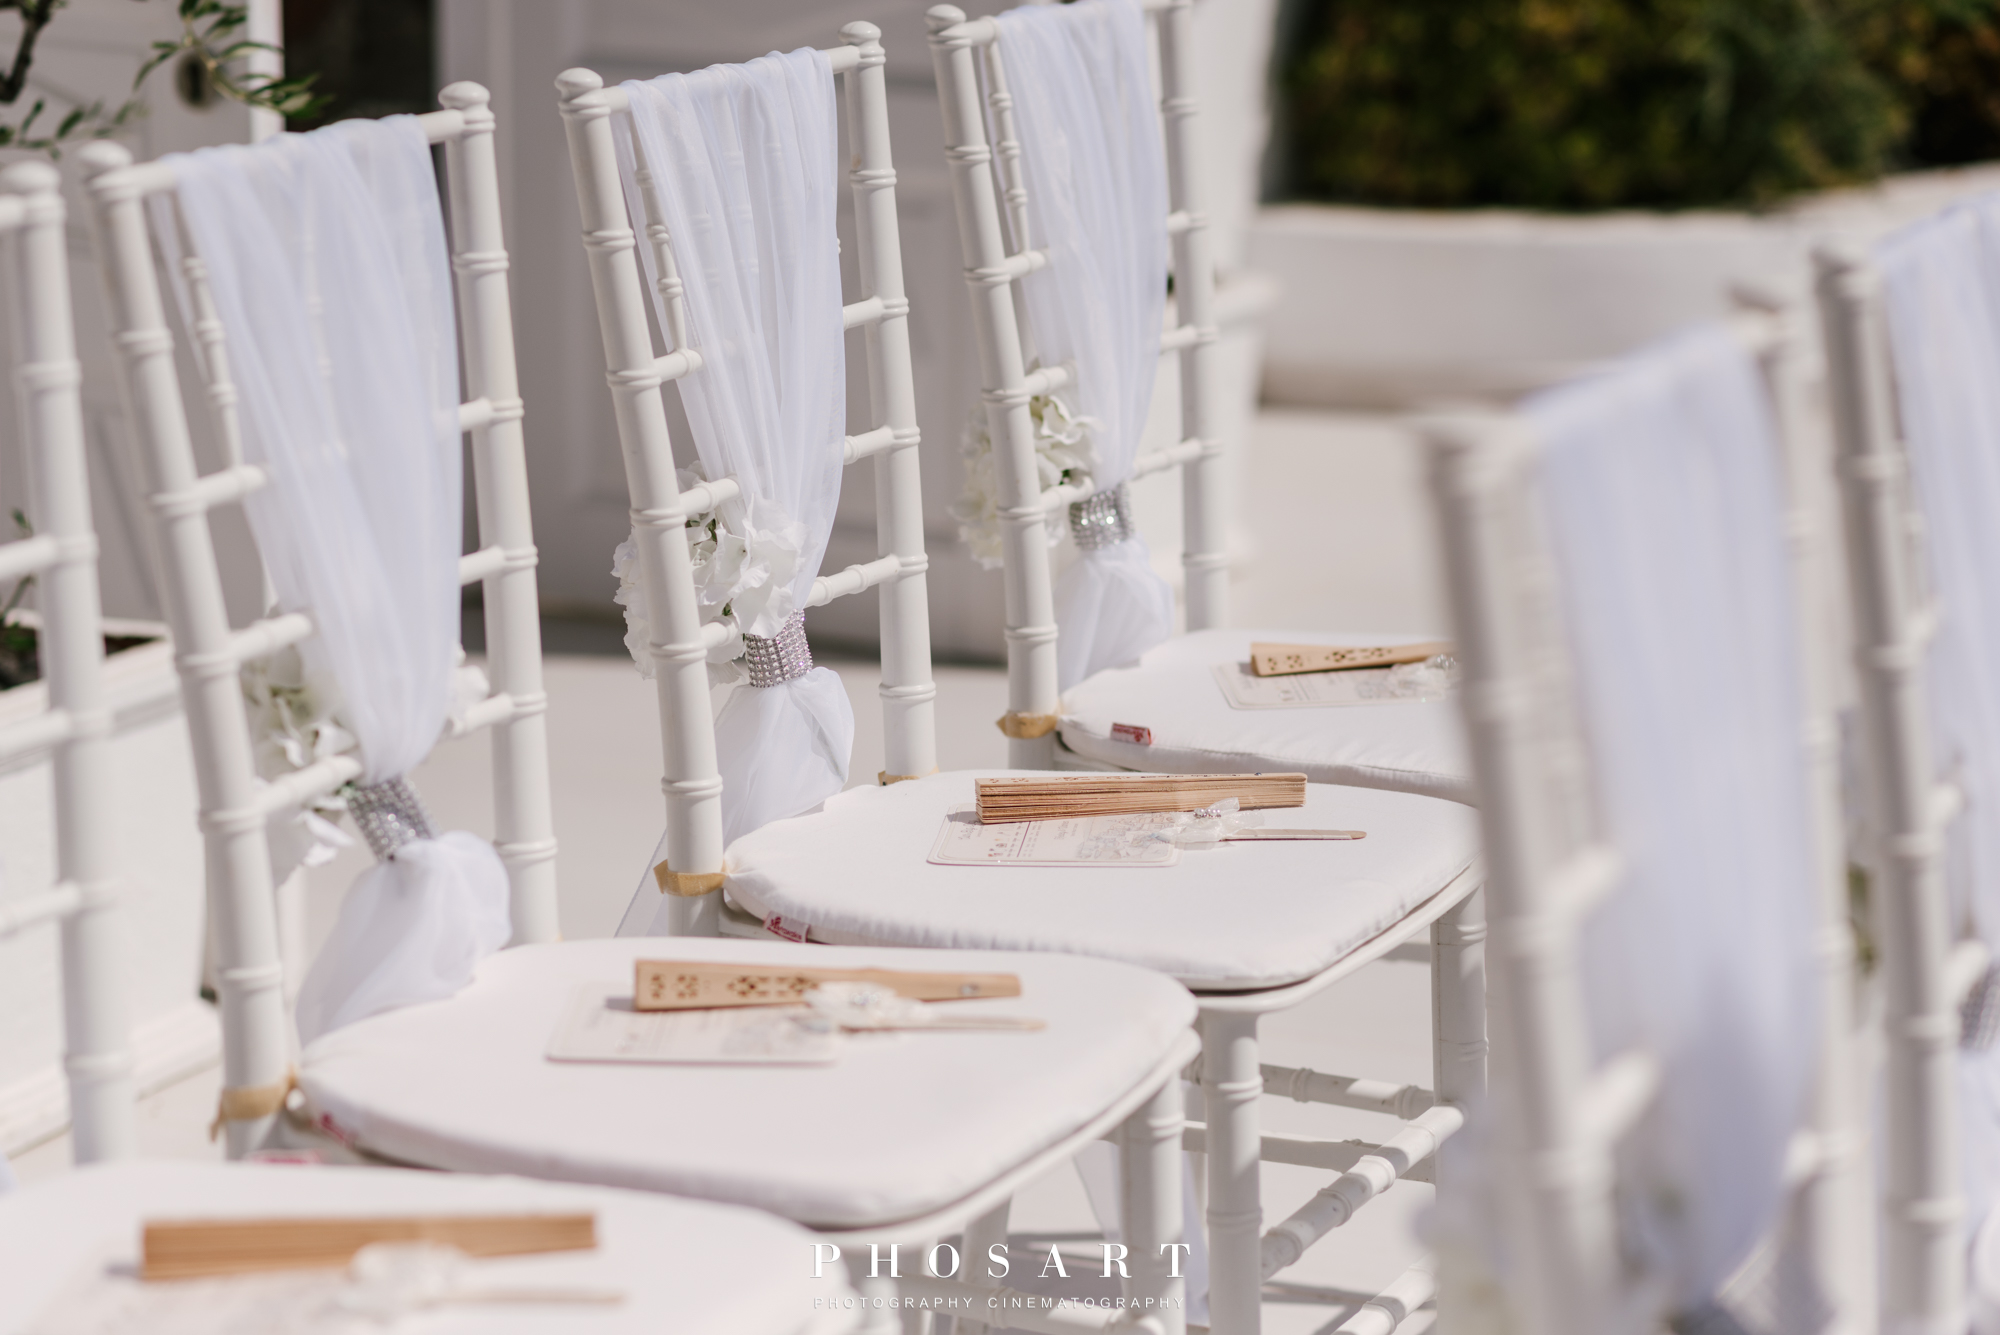 three white wooden chairs ornated with white fabrics, flowers and elegant hand fans